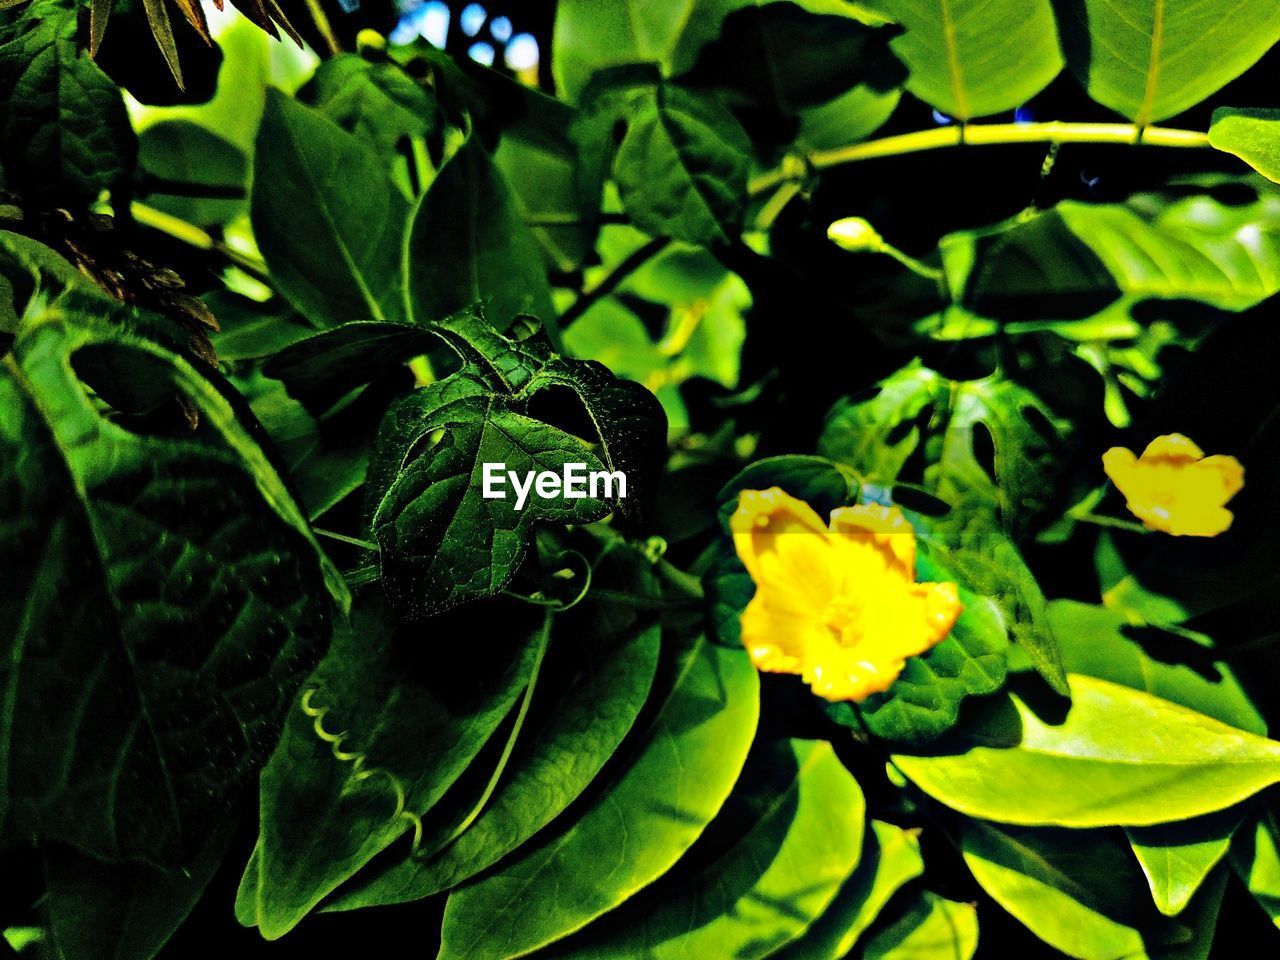 CLOSE-UP OF YELLOW FLOWERING PLANTS LEAVES